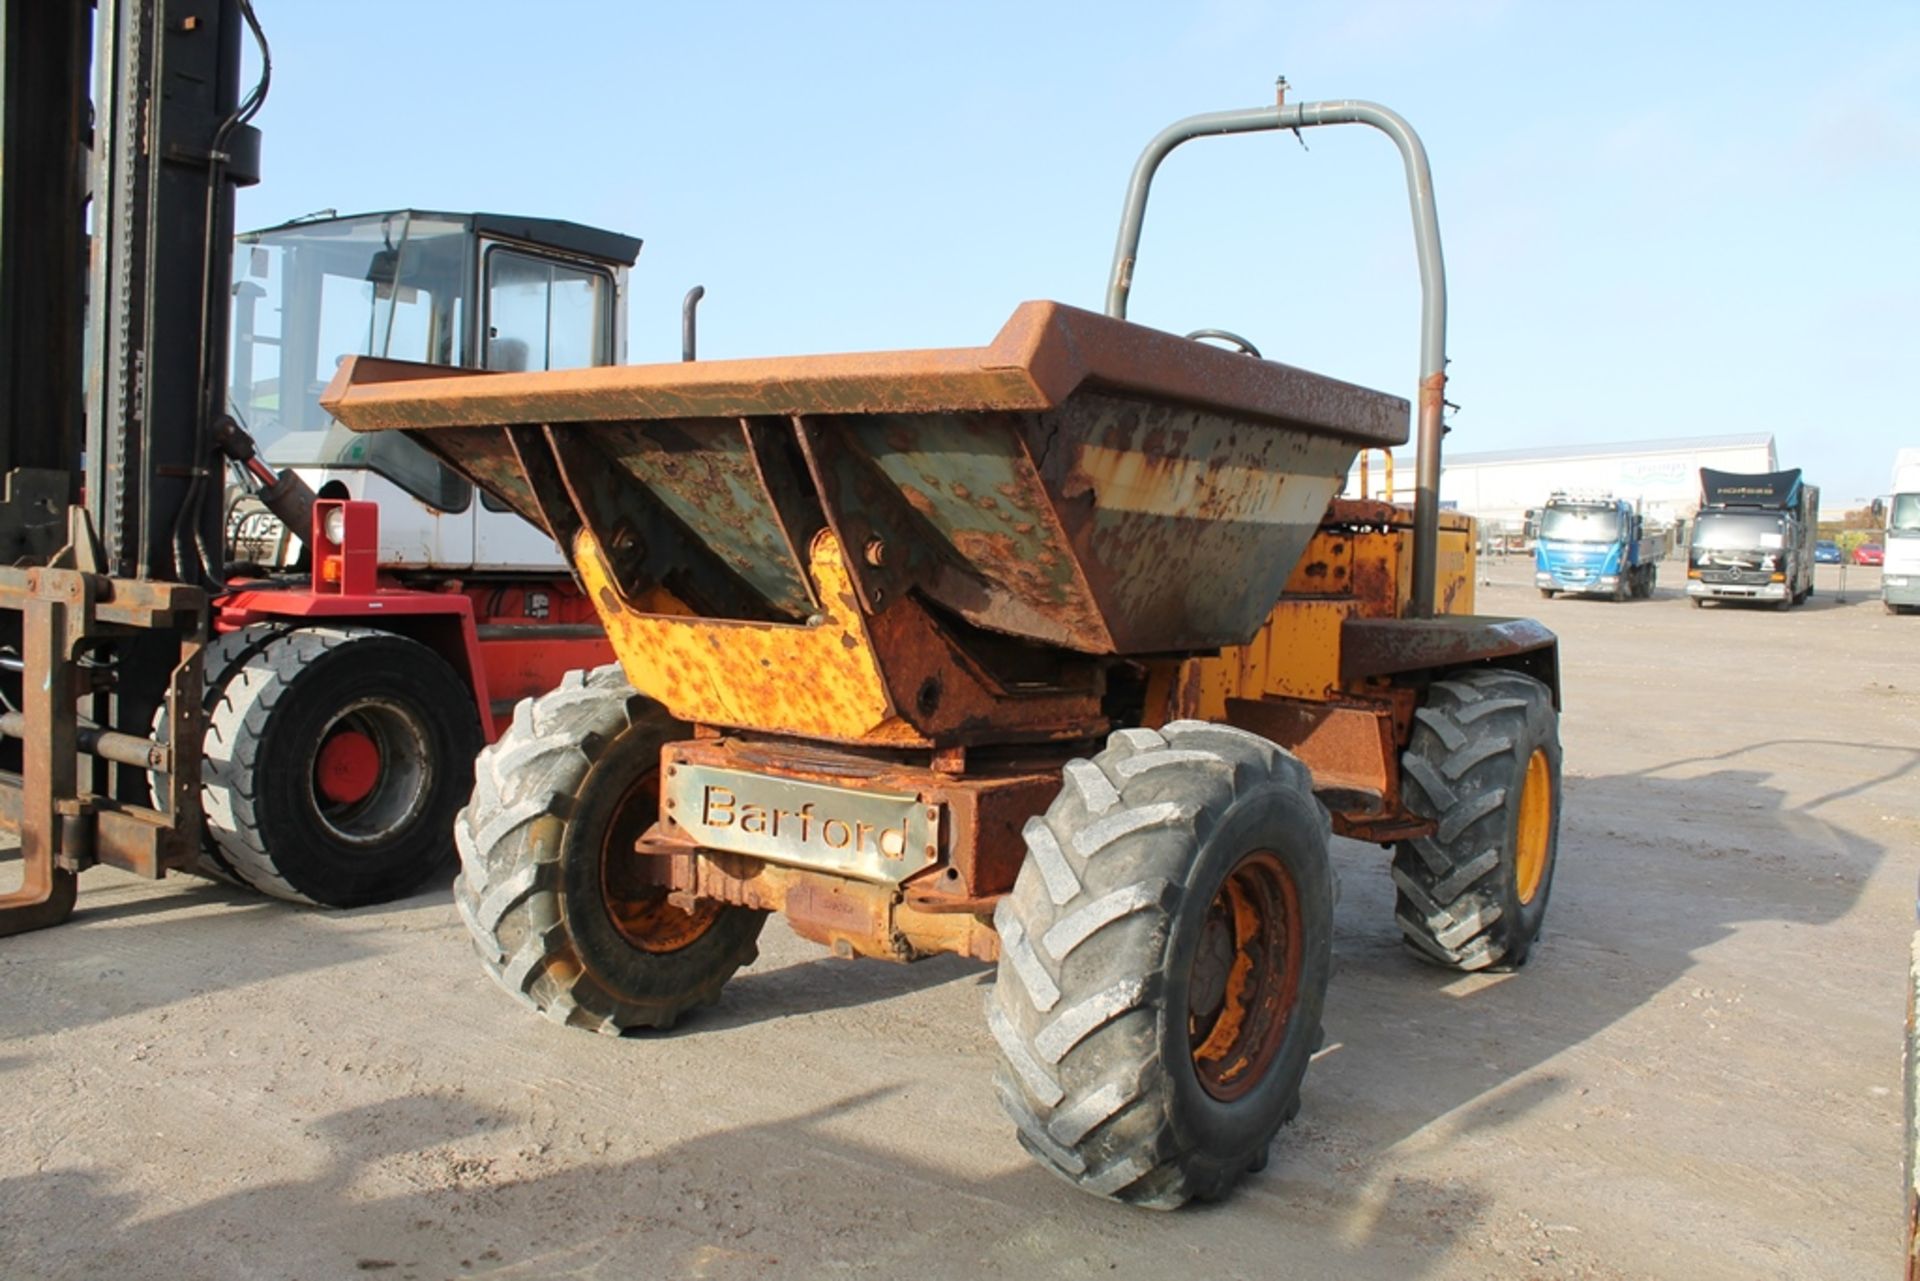 Barford 6000 - 4485cc Tractor - Image 4 of 5